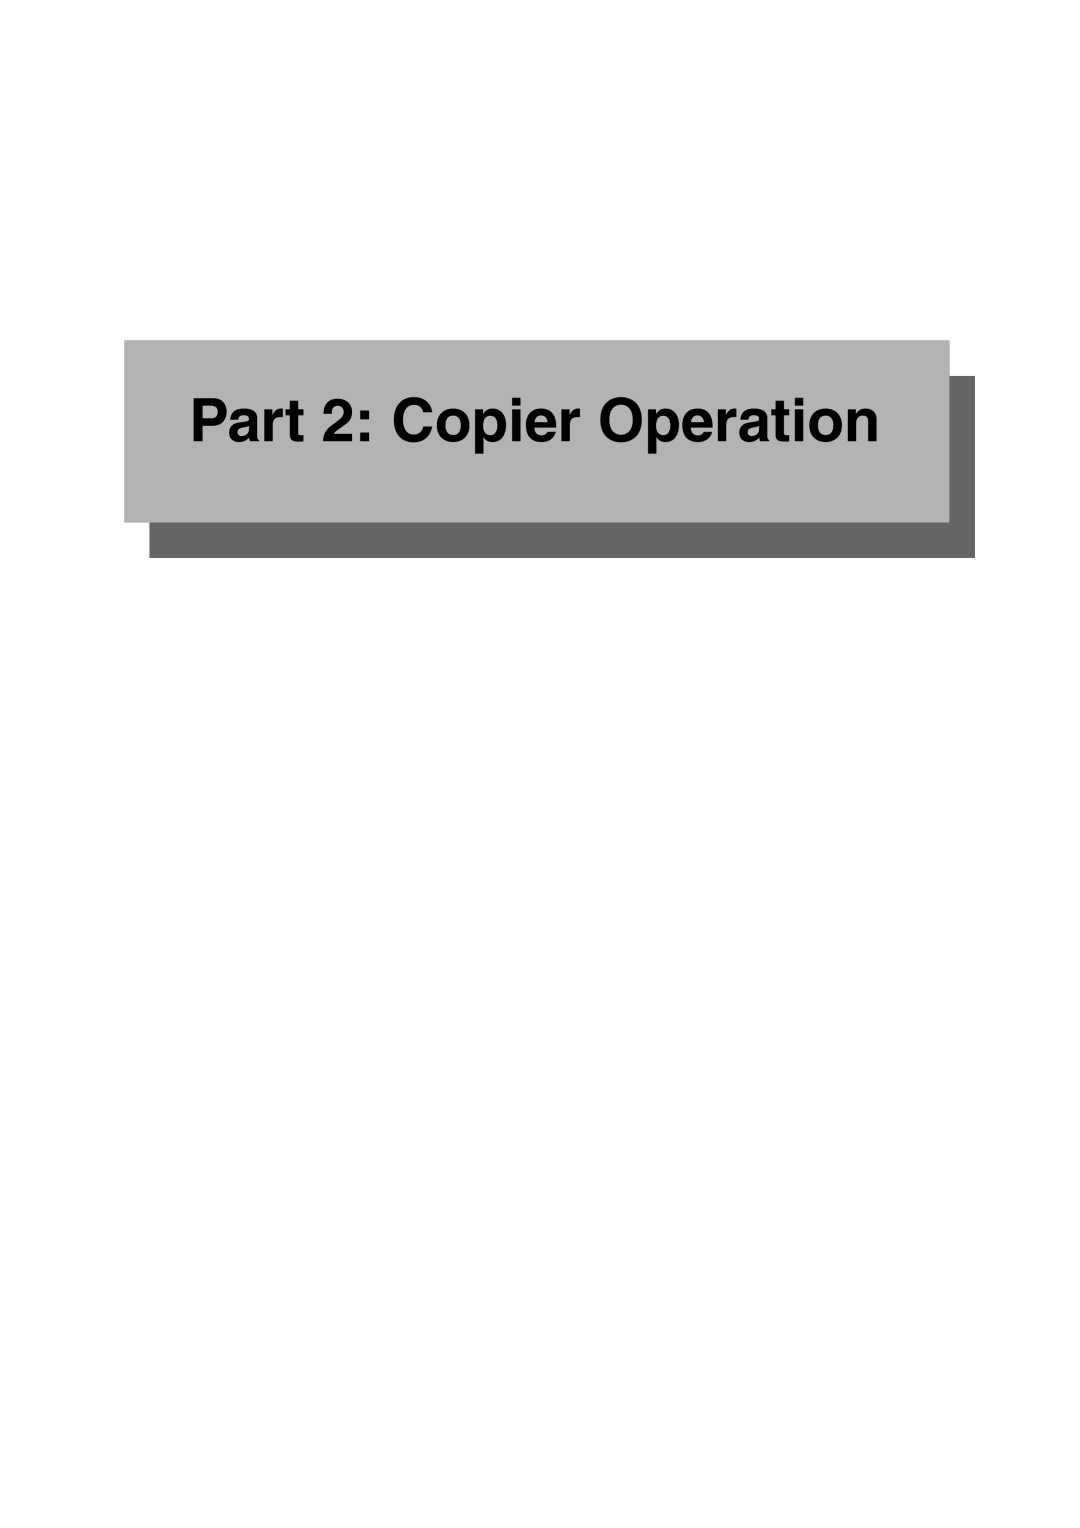 Sharp MX-M700U, MX-M700N, MX-M550U, MX-M620N, MX-M550N, MX-M620U specifications Part 2 Copier Operation 